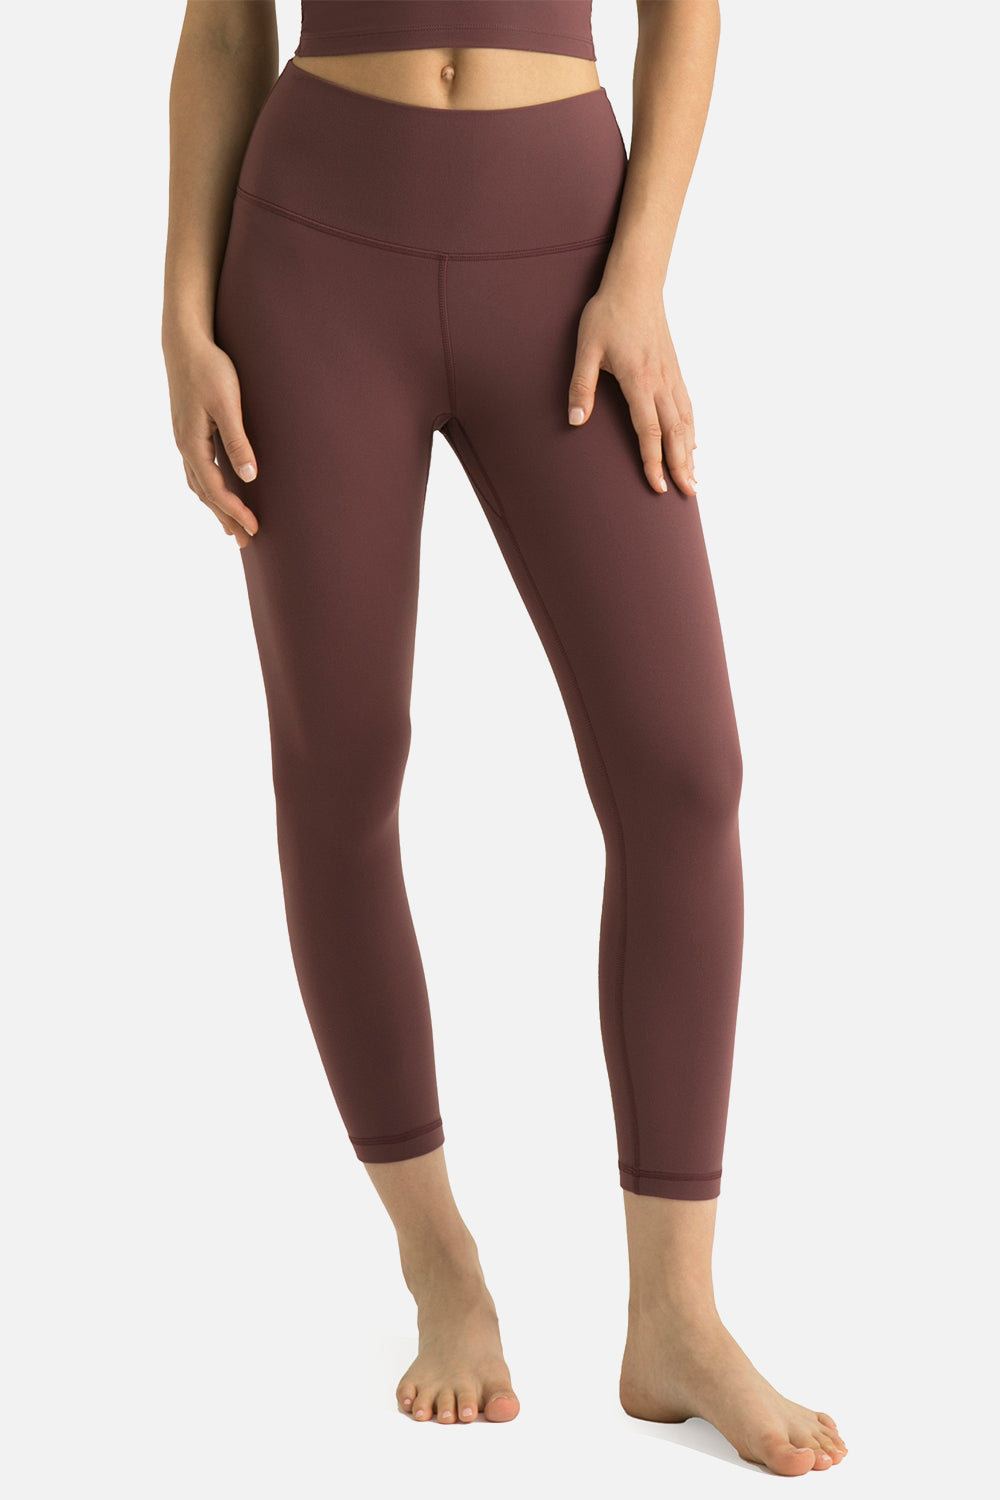 Dreamlux Flared Leggings with Zippered Pockets 29.5 / 31.5 Inseam –  colorfulkoala